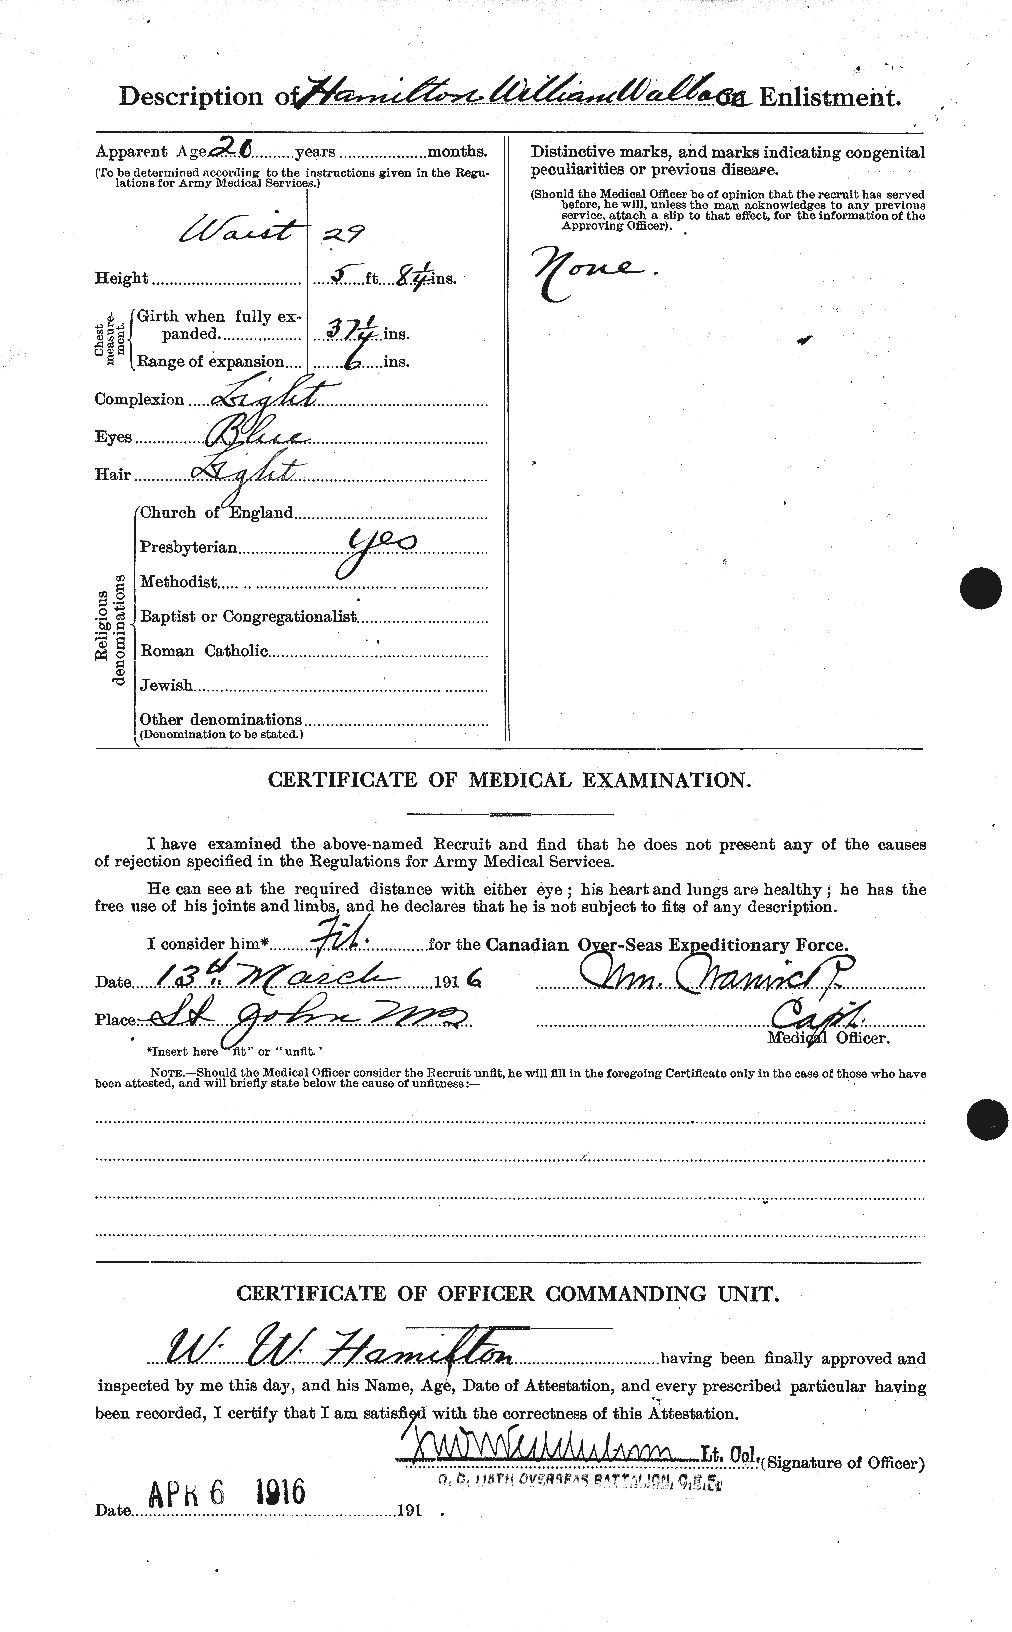 Personnel Records of the First World War - CEF 374932b